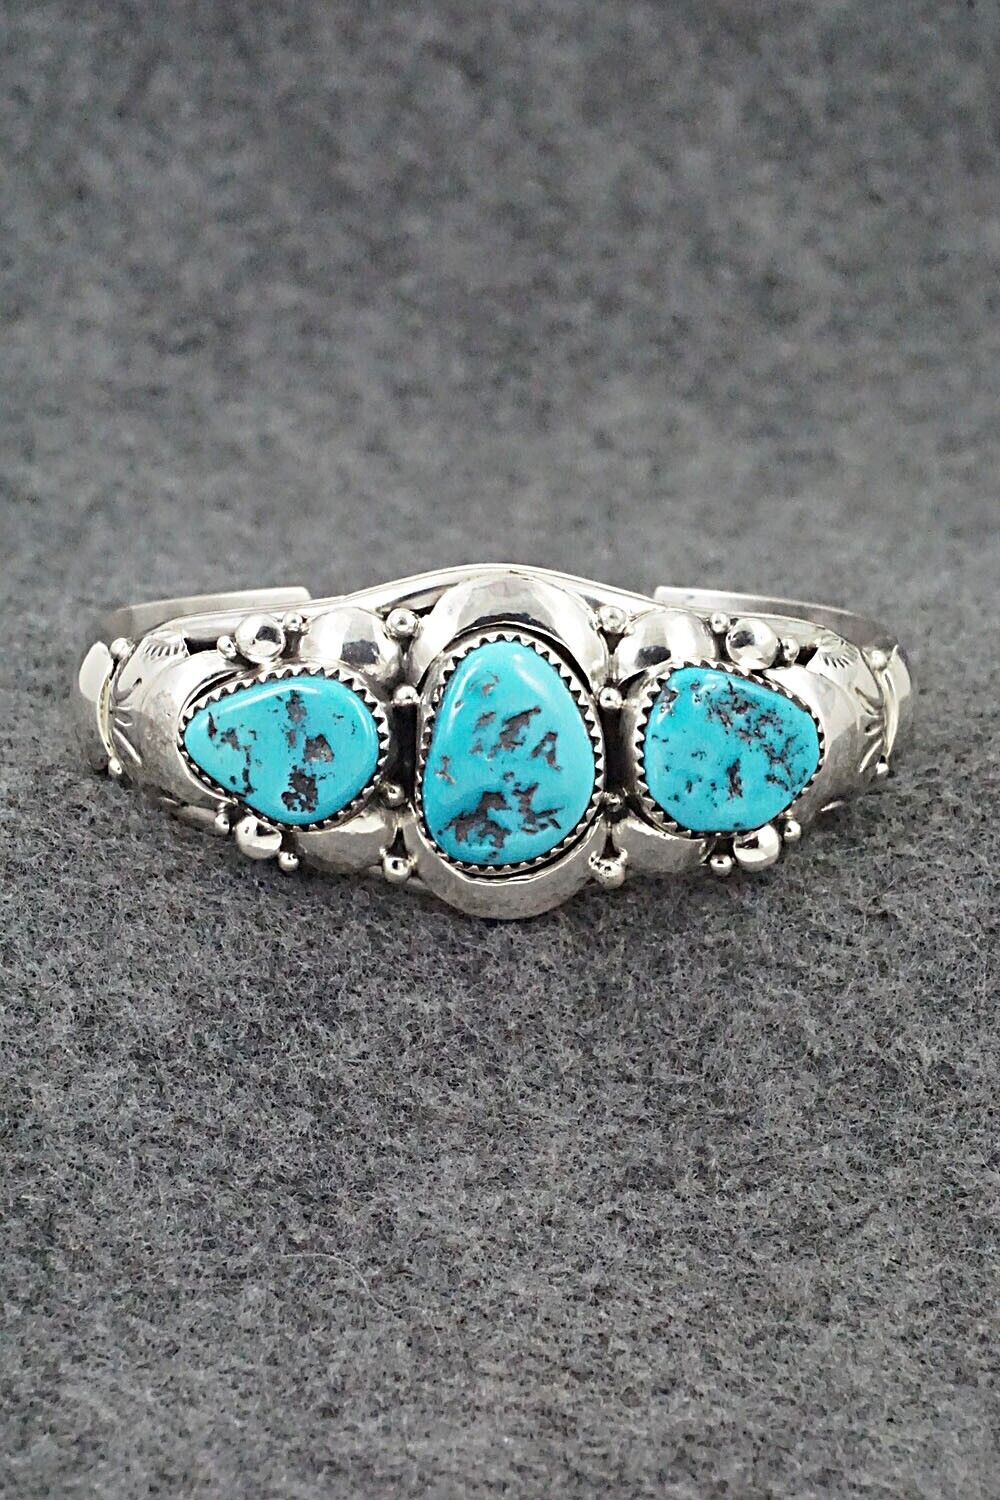 Turquoise and Sterling Silver Bracelet & Ring Set - Clem Nalwood - Size 7.25